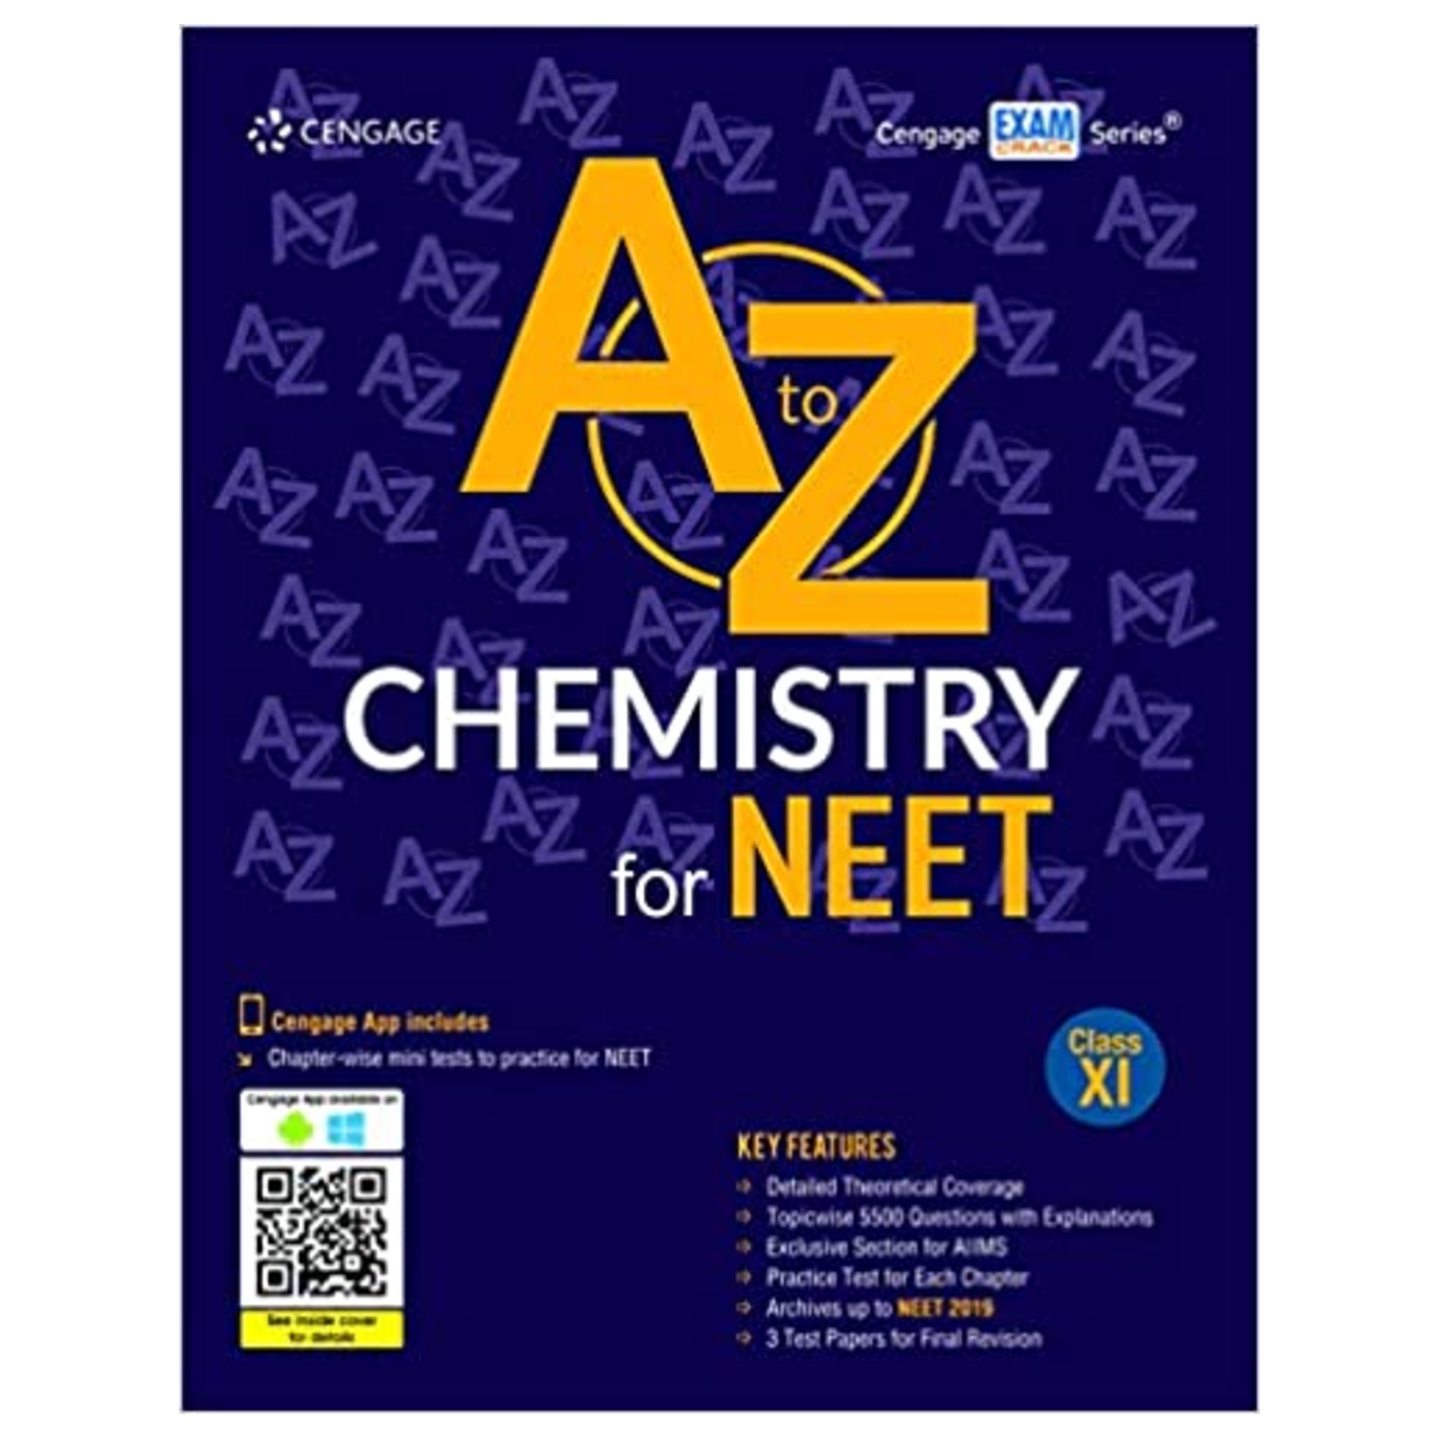 A to Z Chemistry for NEET Class XI CENGAGE